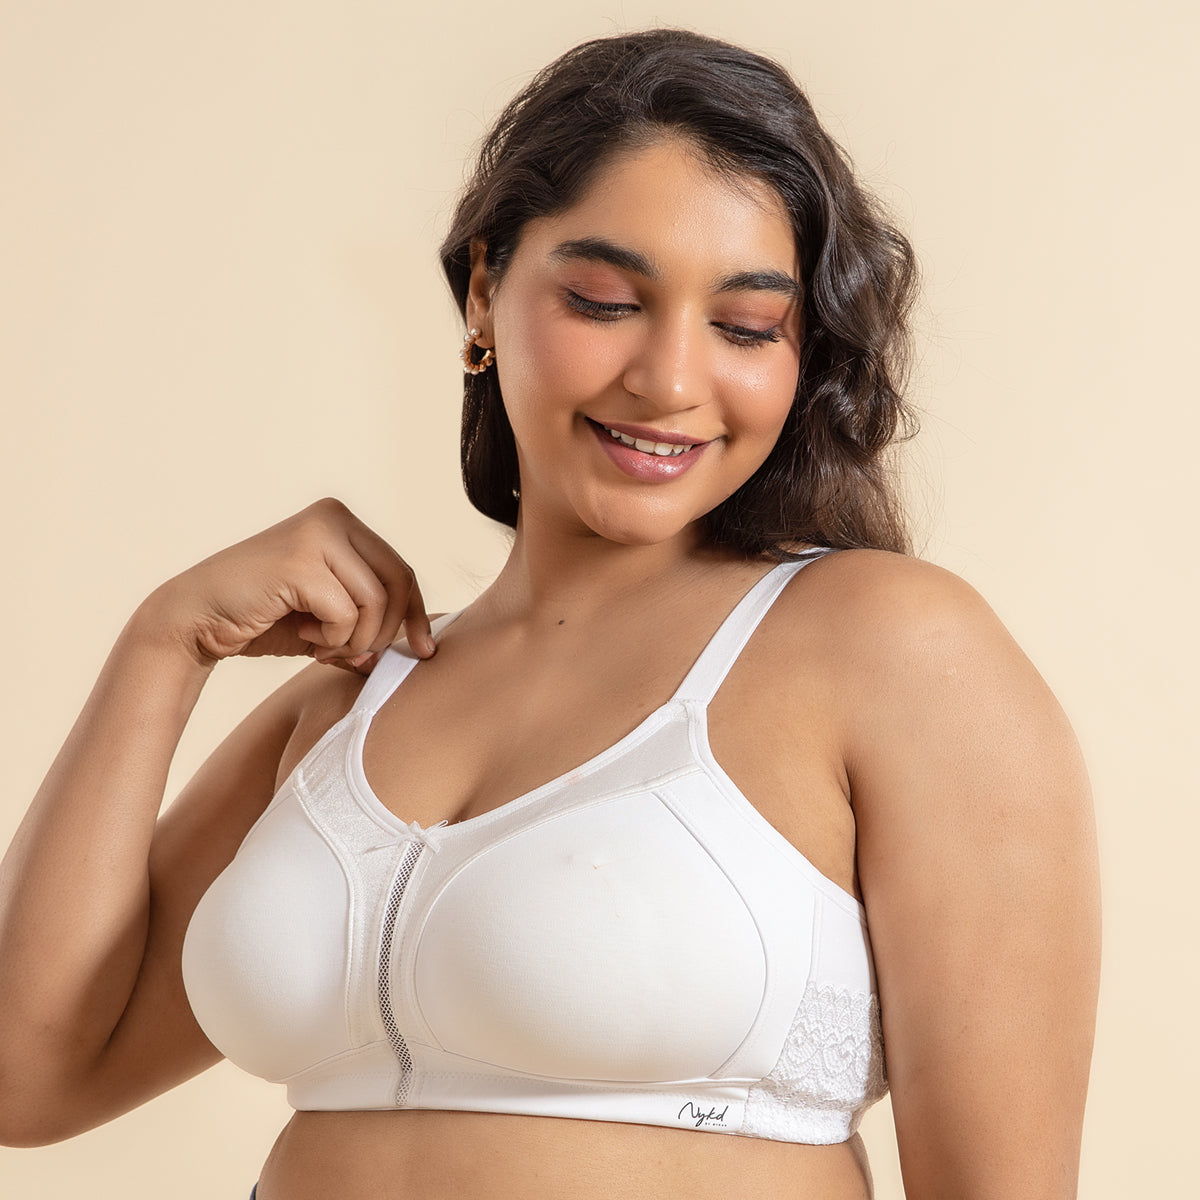 Buy Nykd by Nykaa Support Me Pretty Bra - Blue NYB101 Online